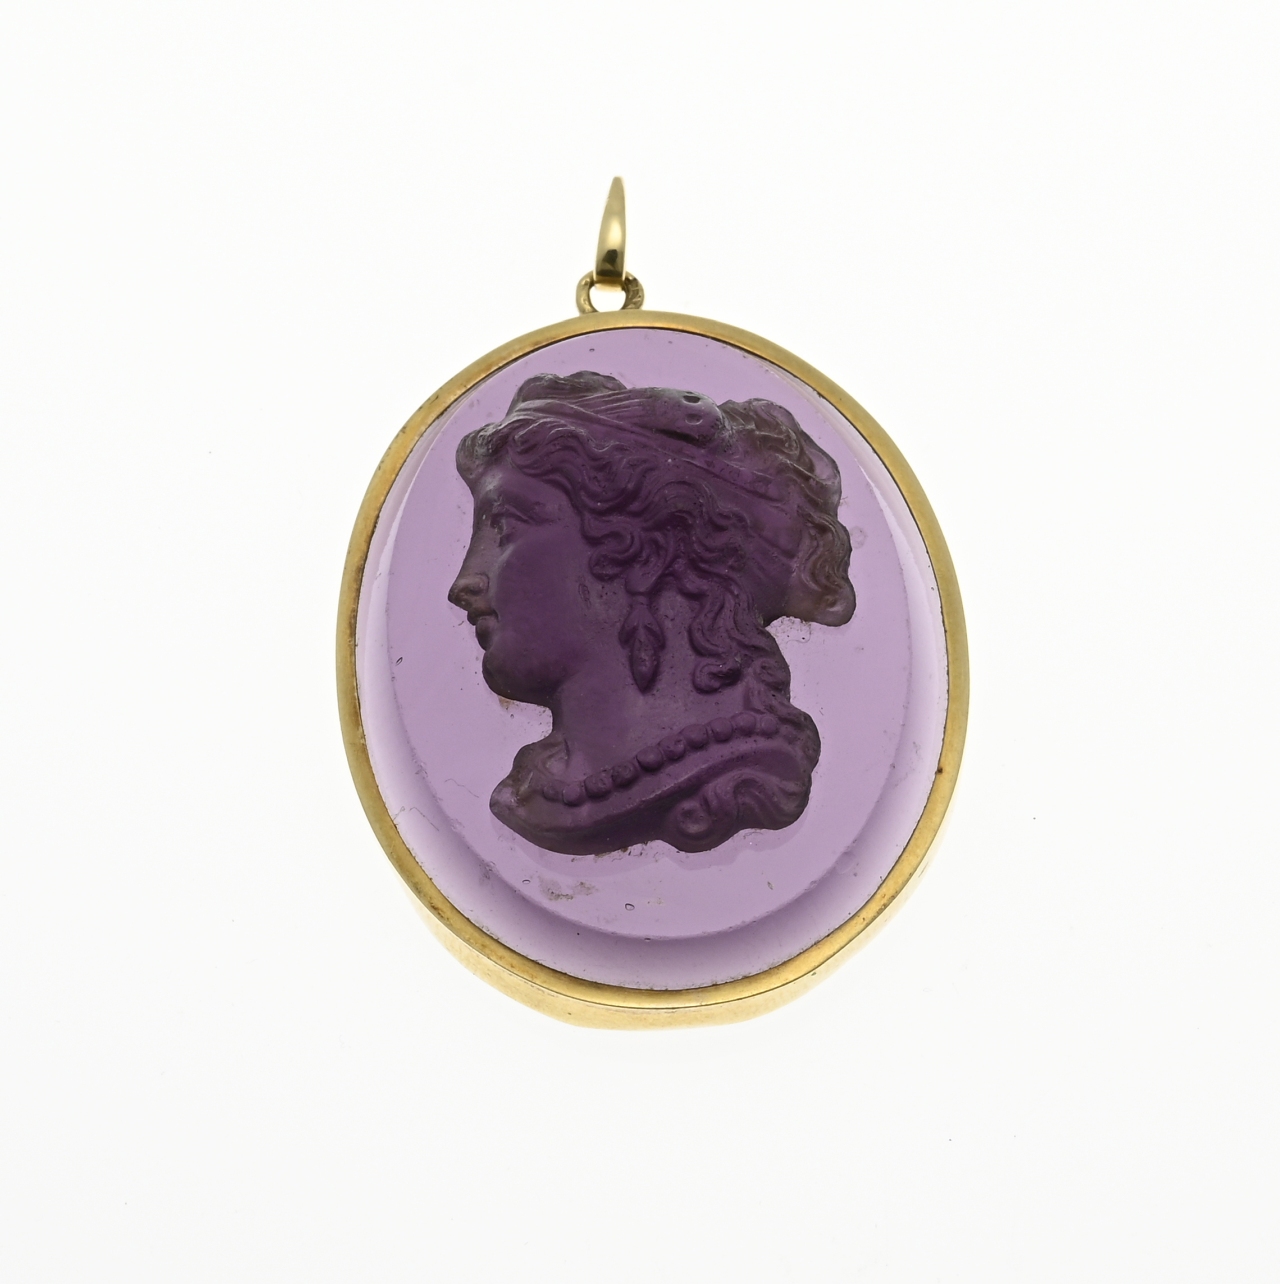 Gold pendant with amethyst cameo